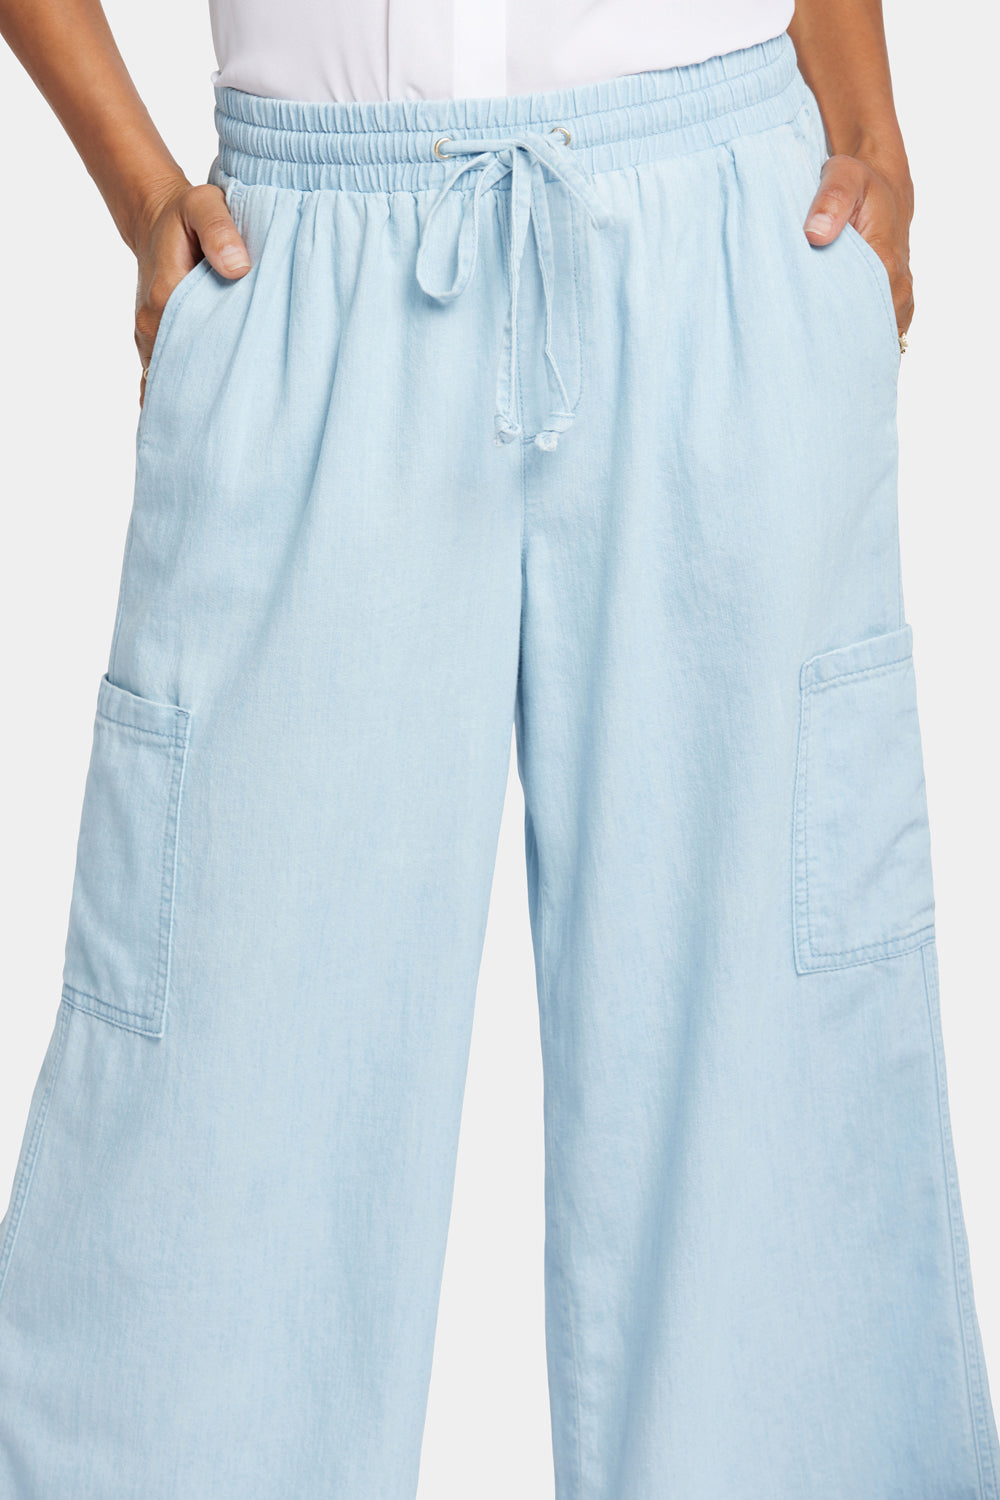 NYDJ Whitney Crop Pull-On Cargo Pants With Super High Rise - Oceanfront